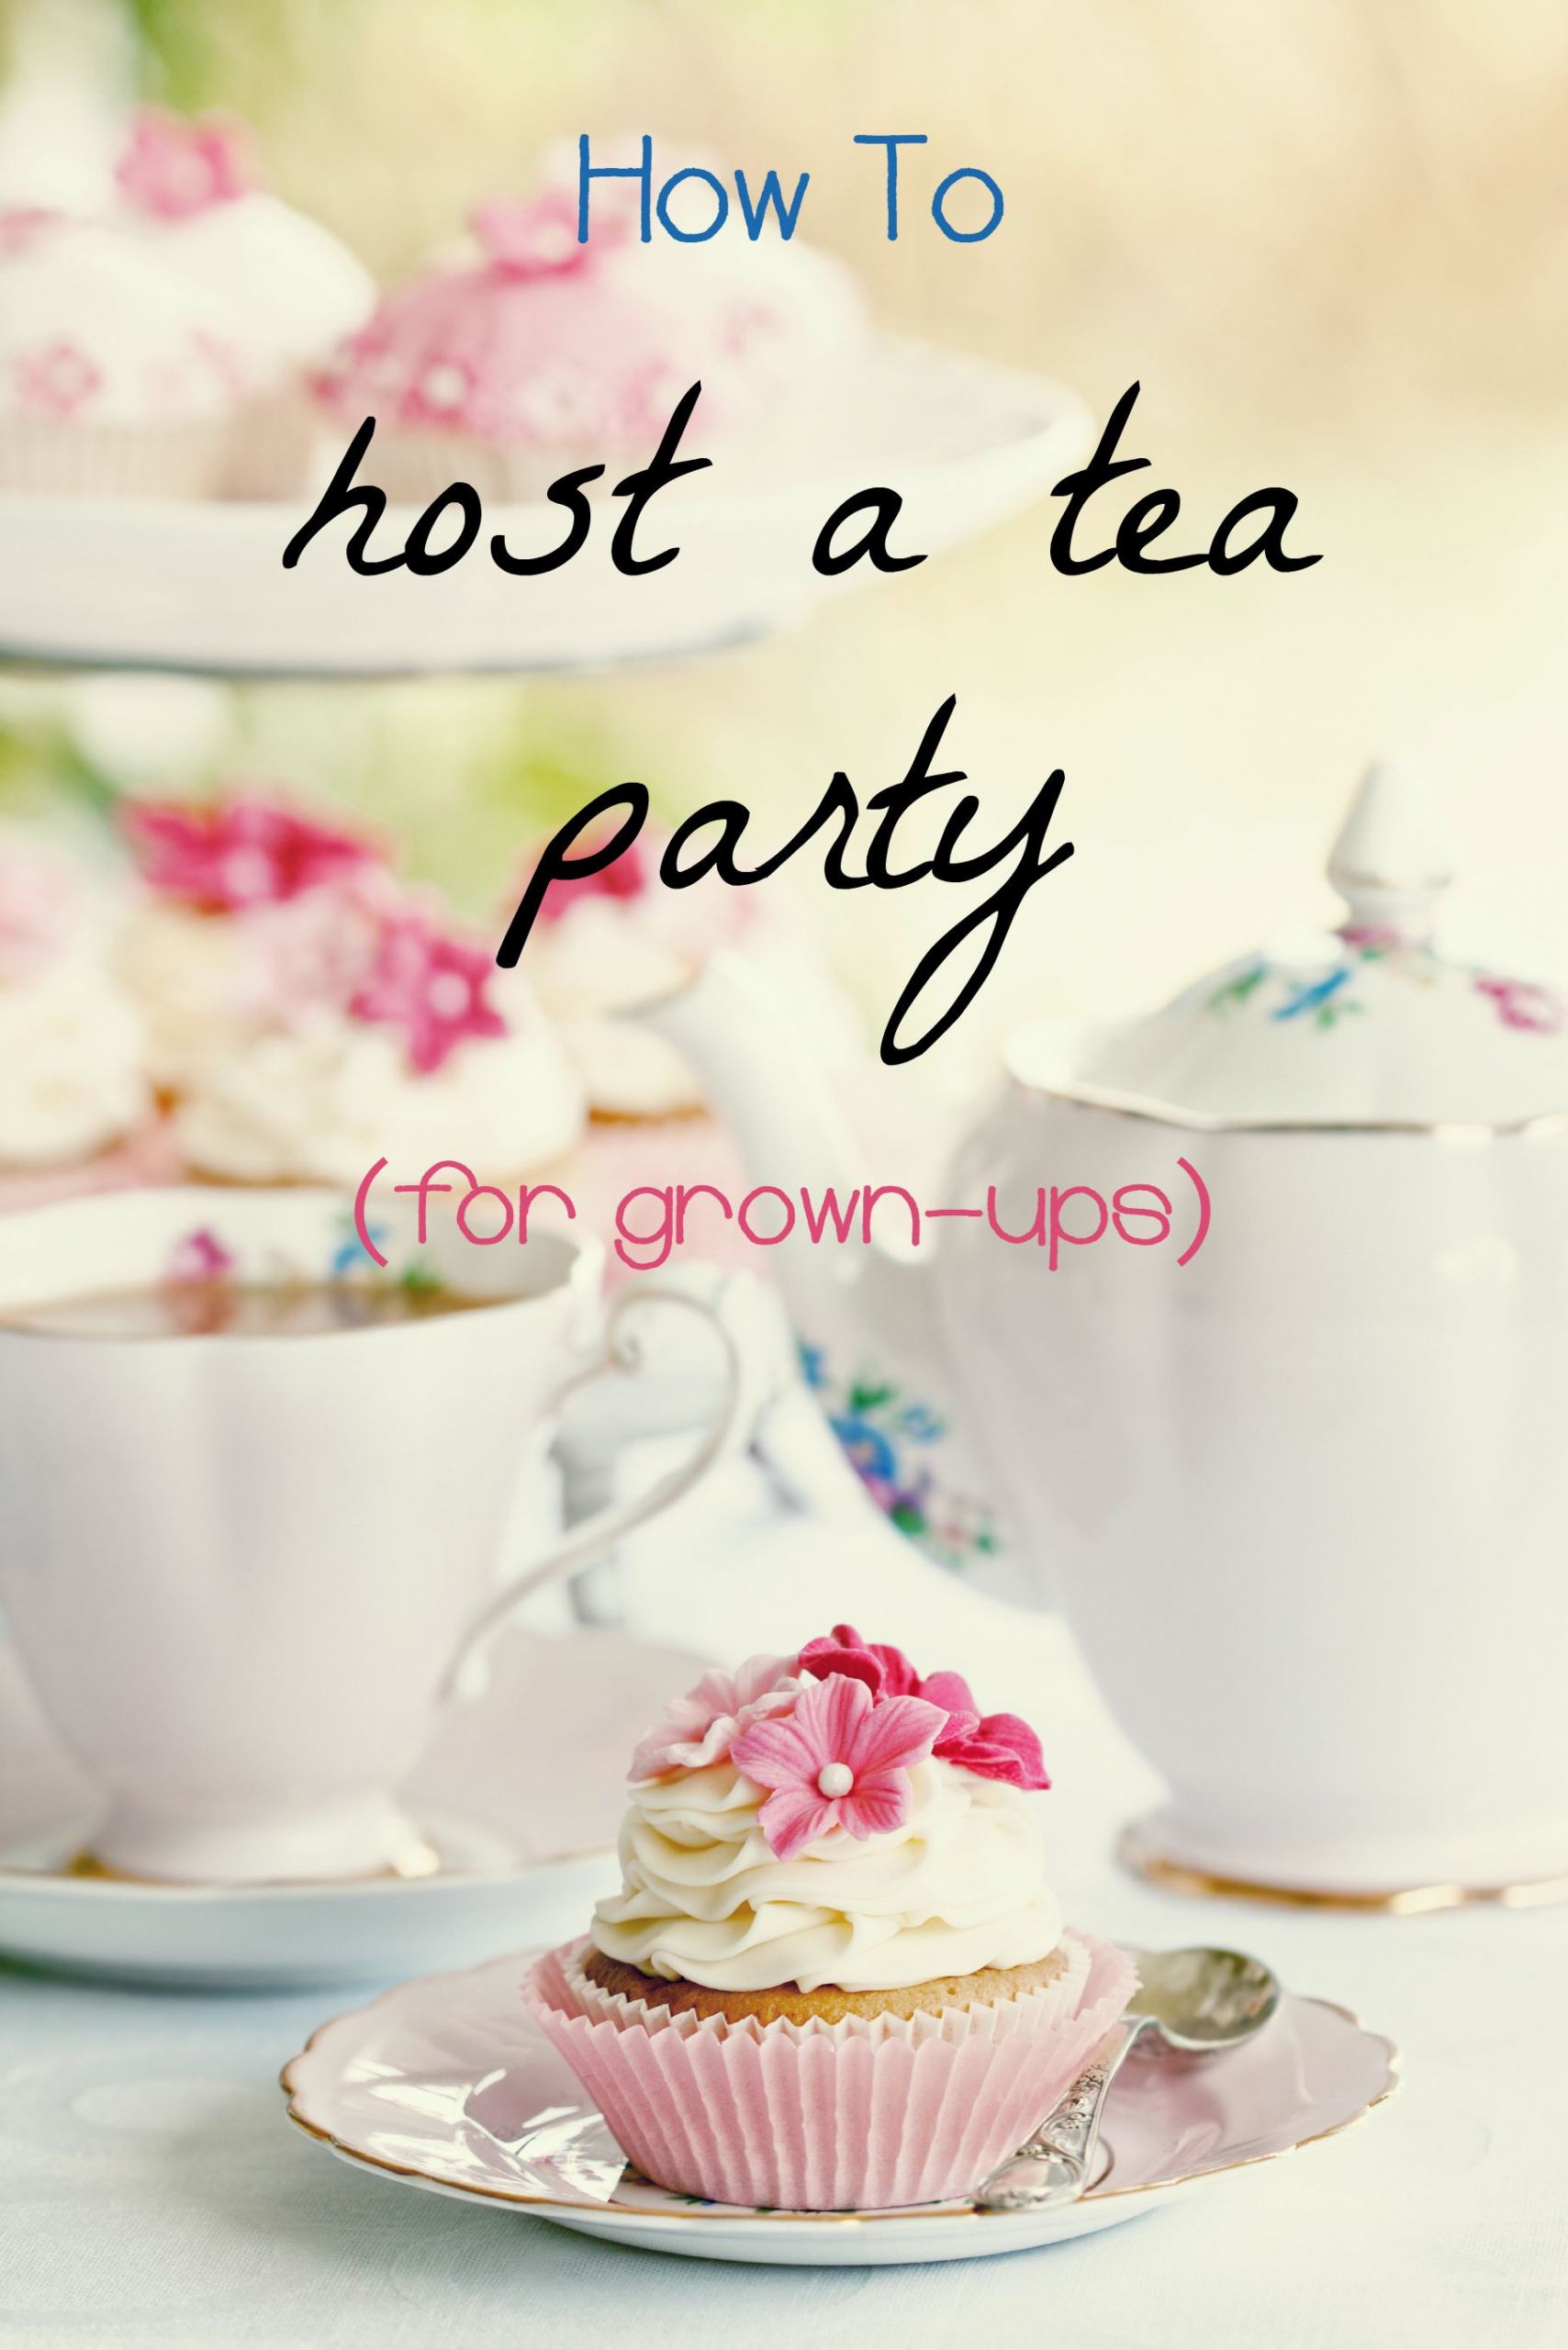 Adult Tea Party Ideas
 Tea parties can be a fabulous way to share an afternoon